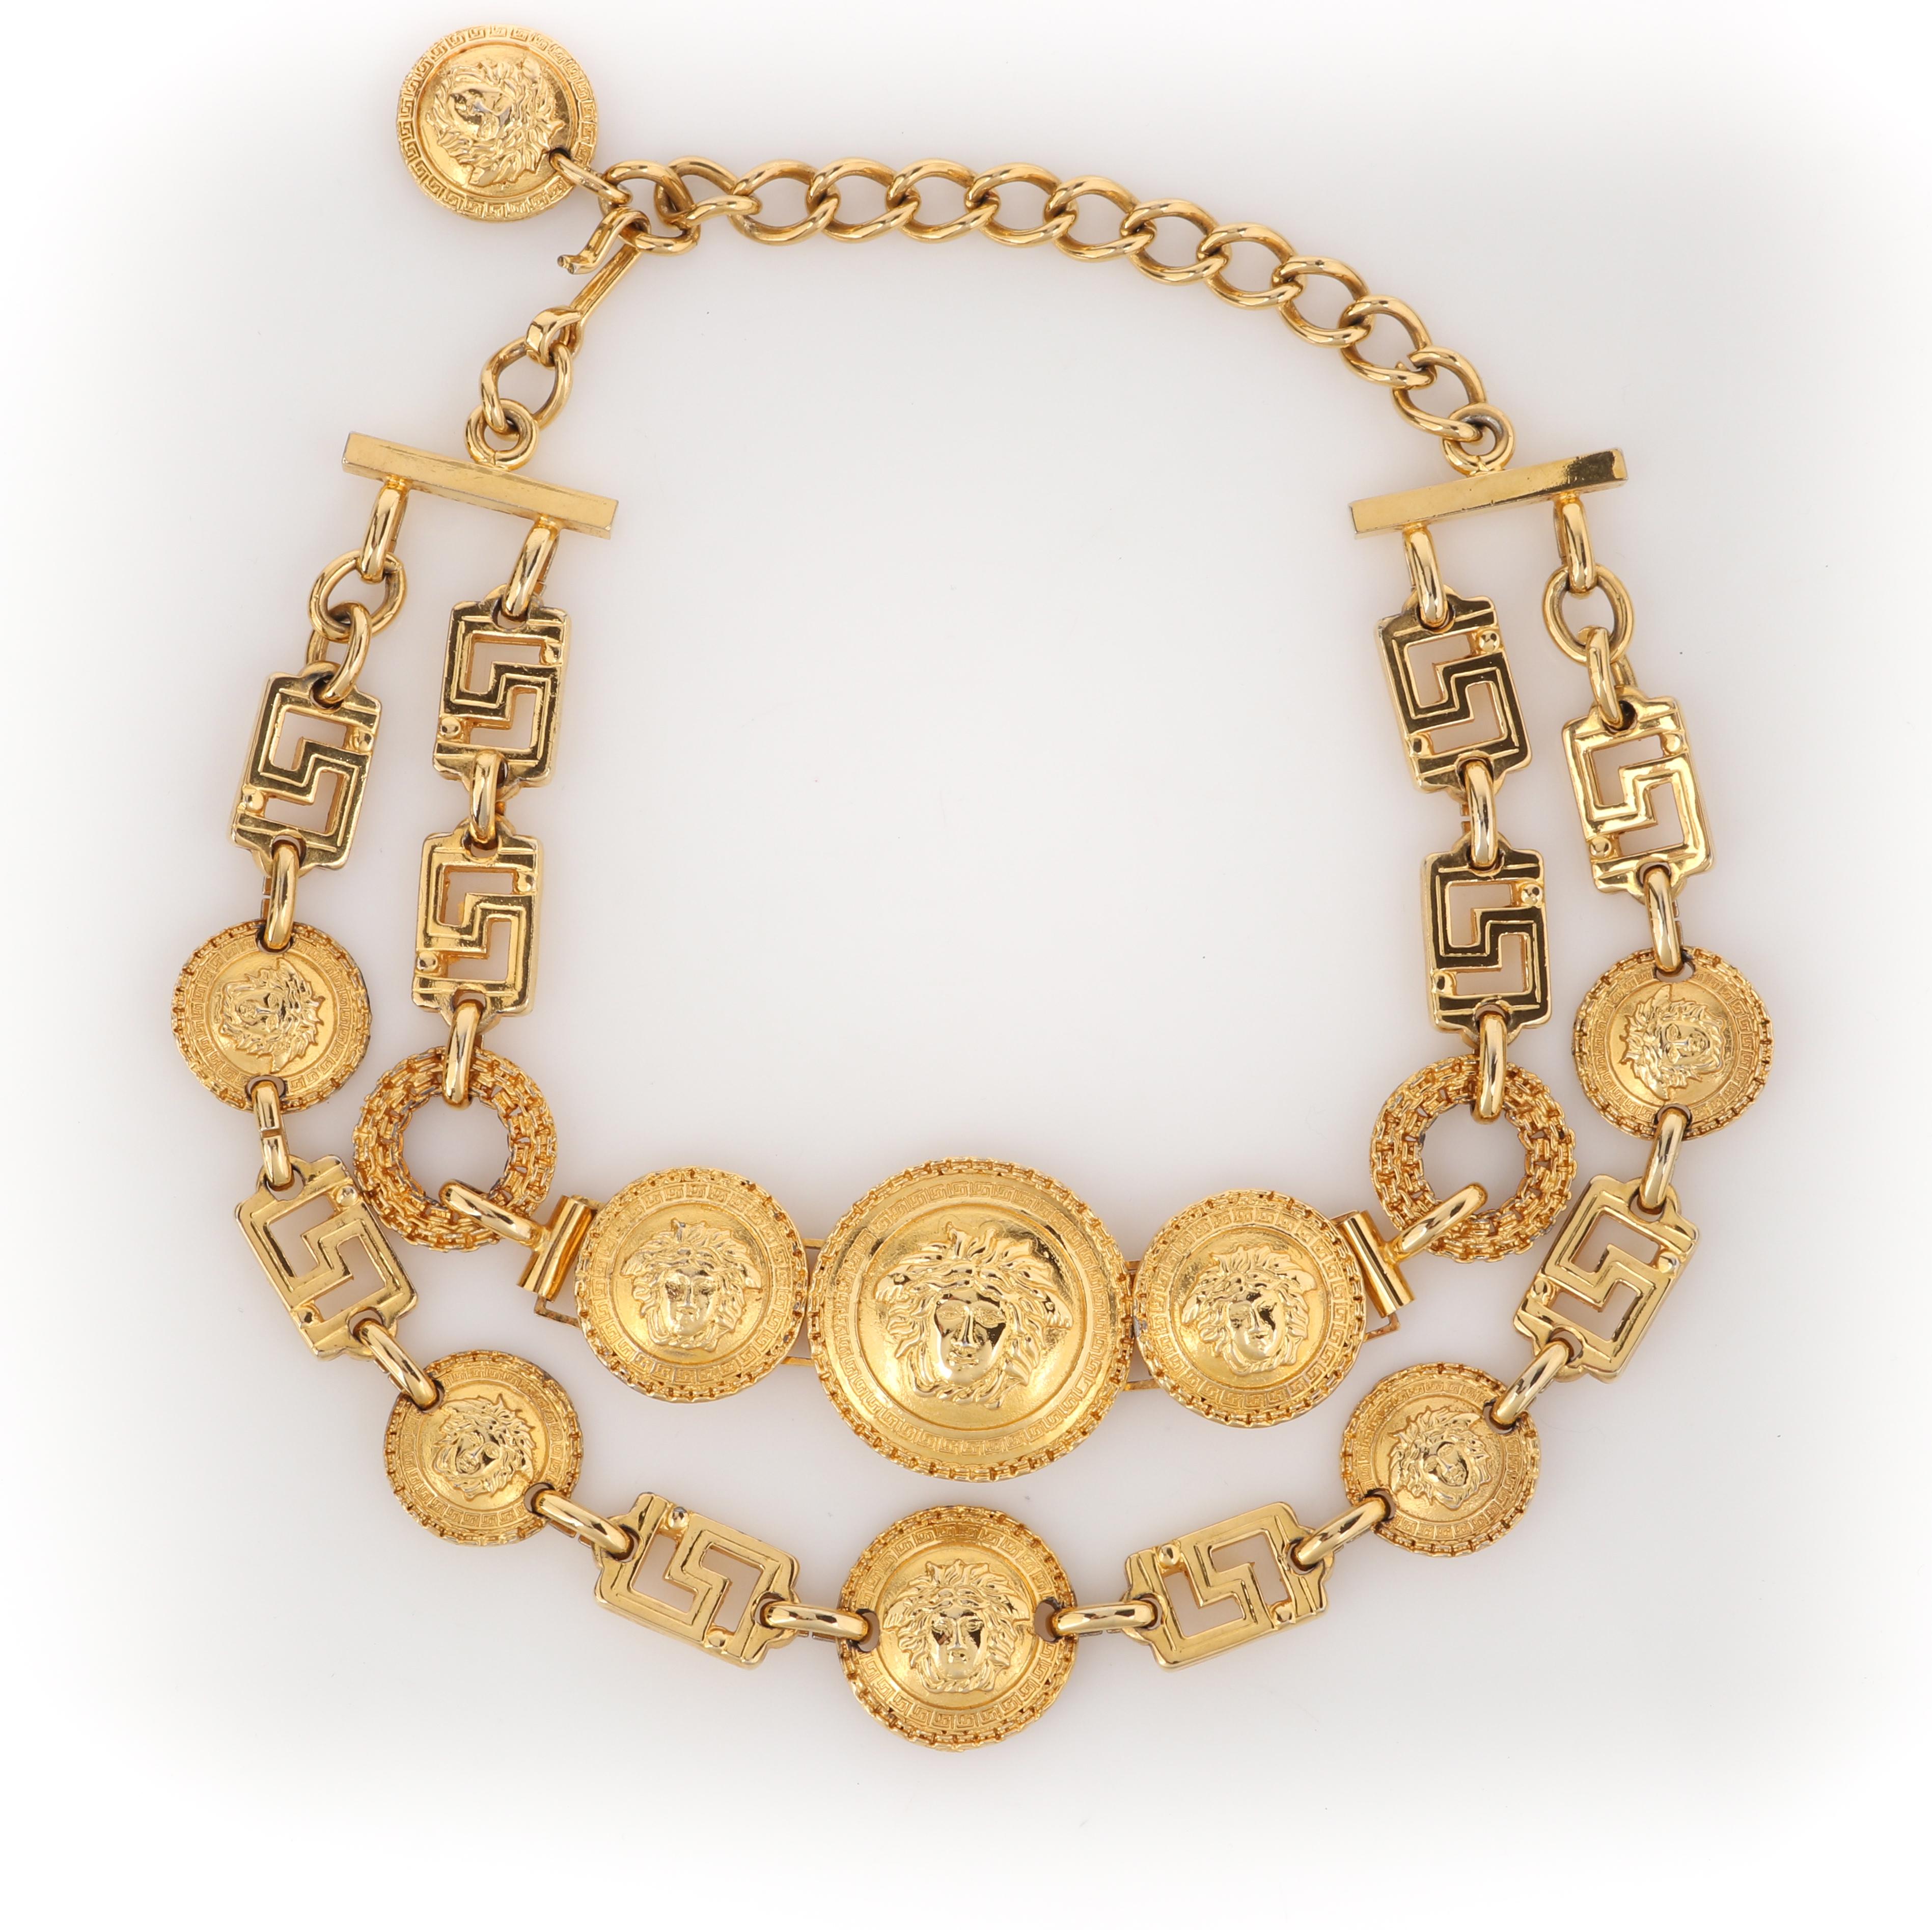 GIANNI VERSACE F/W 1992 Gold Signature Medusa Medallion Coin Choker Bib Necklace
 
Brand / Manufacturer: Gianni Versace
Collection: F/W 1992
Designer: Gianni Versace
Style: Chain bib necklace
Color(s): Gold
Unmarked Material (feel of): Gold plated